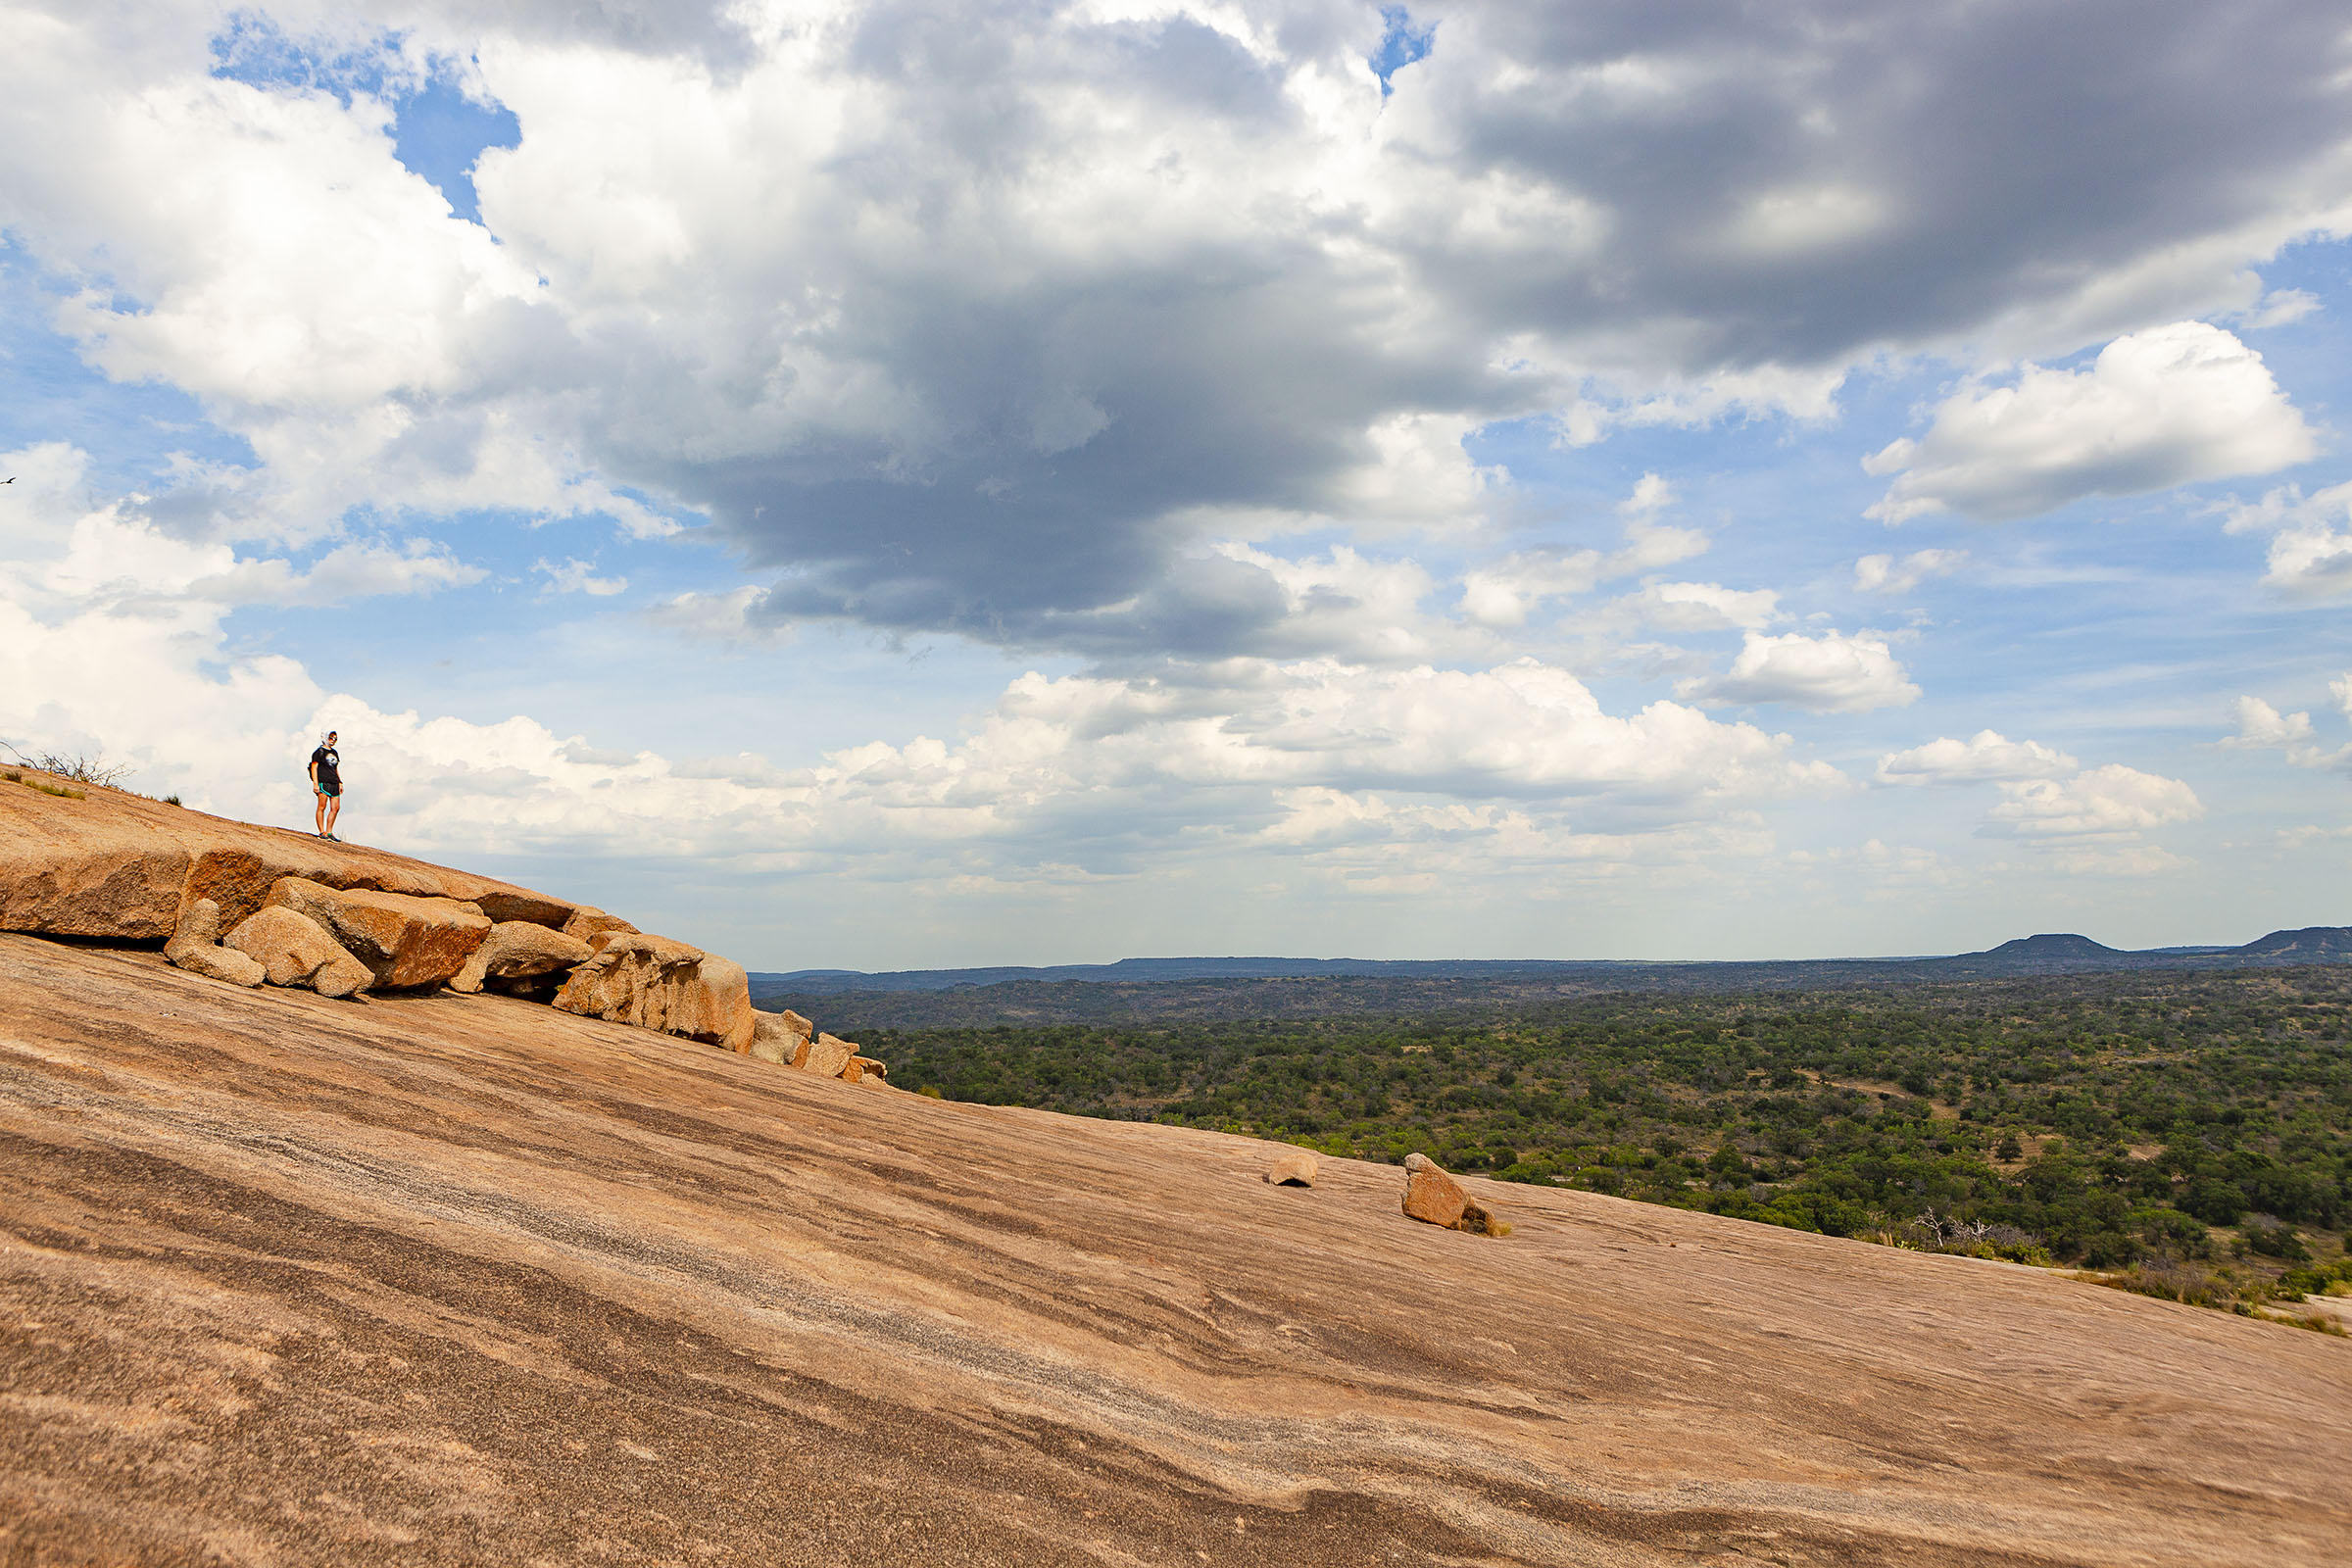 A wide view of the red-gray surface of Enchanted Rock, high in the air against a green backdrop under blue sky